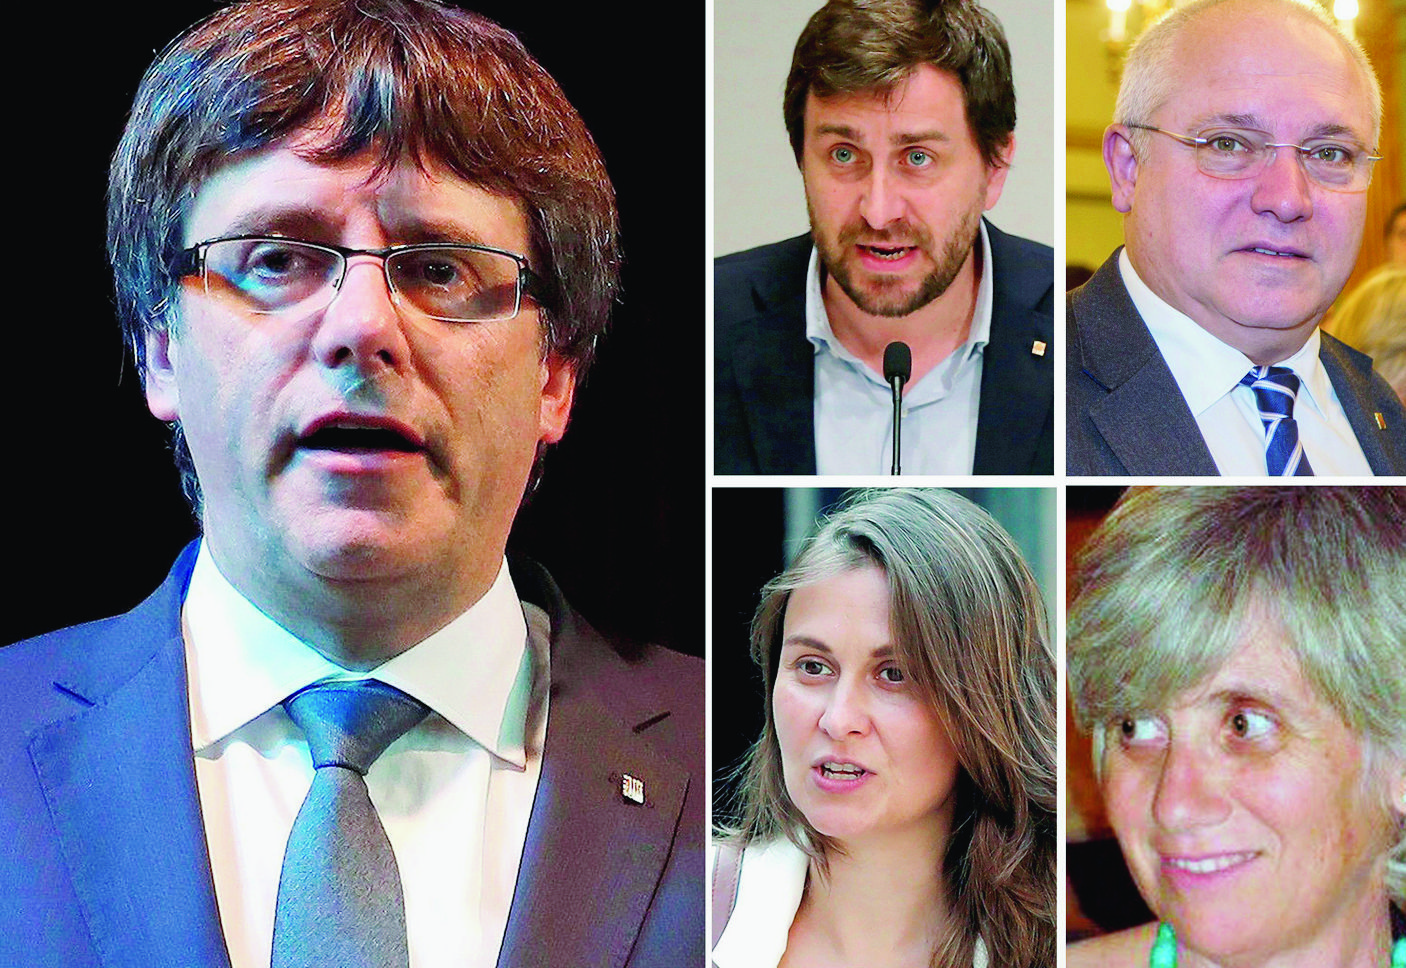 epa06306822 A combo file picture issued on 03 November 2017 shows former Catalan President Carles Puigdemont (L) and four former members of Catalan government (top L-R) Antoni Comin, Lluis Puig, Meritxell Serret, and Clara Ponsati. Judge Carmen Lamela issued an European detention for Puigdemont and former members of Catalan government involved in the declaration of independence passed in the regional parliament last 27 October 2017, who travelled to Brussels on 30 October.  EPA/EFE SPAIN CATALONIA